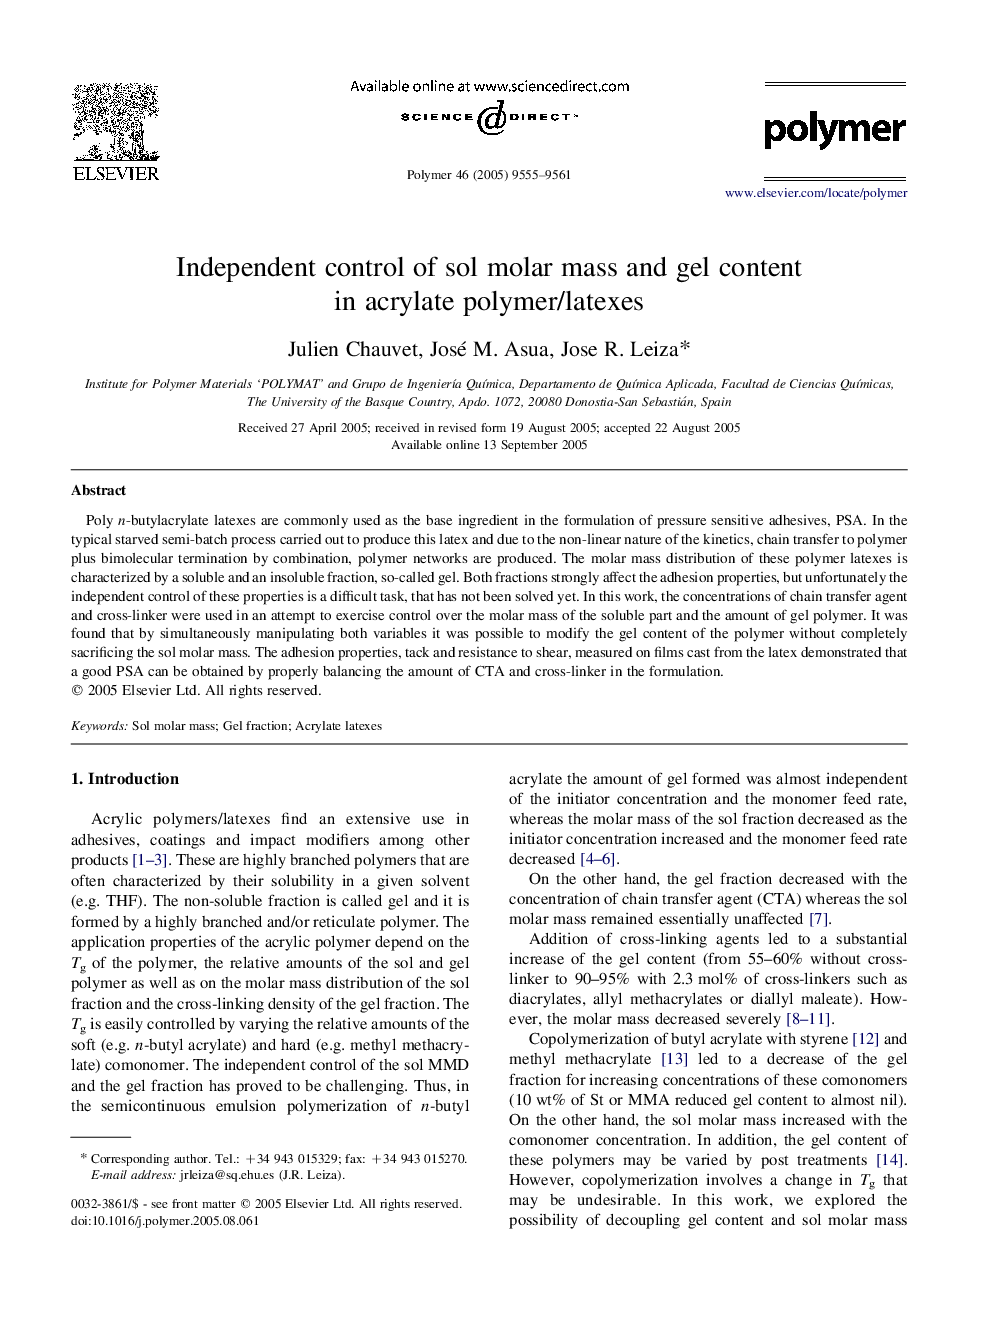 Independent control of sol molar mass and gel content in acrylate polymer/latexes